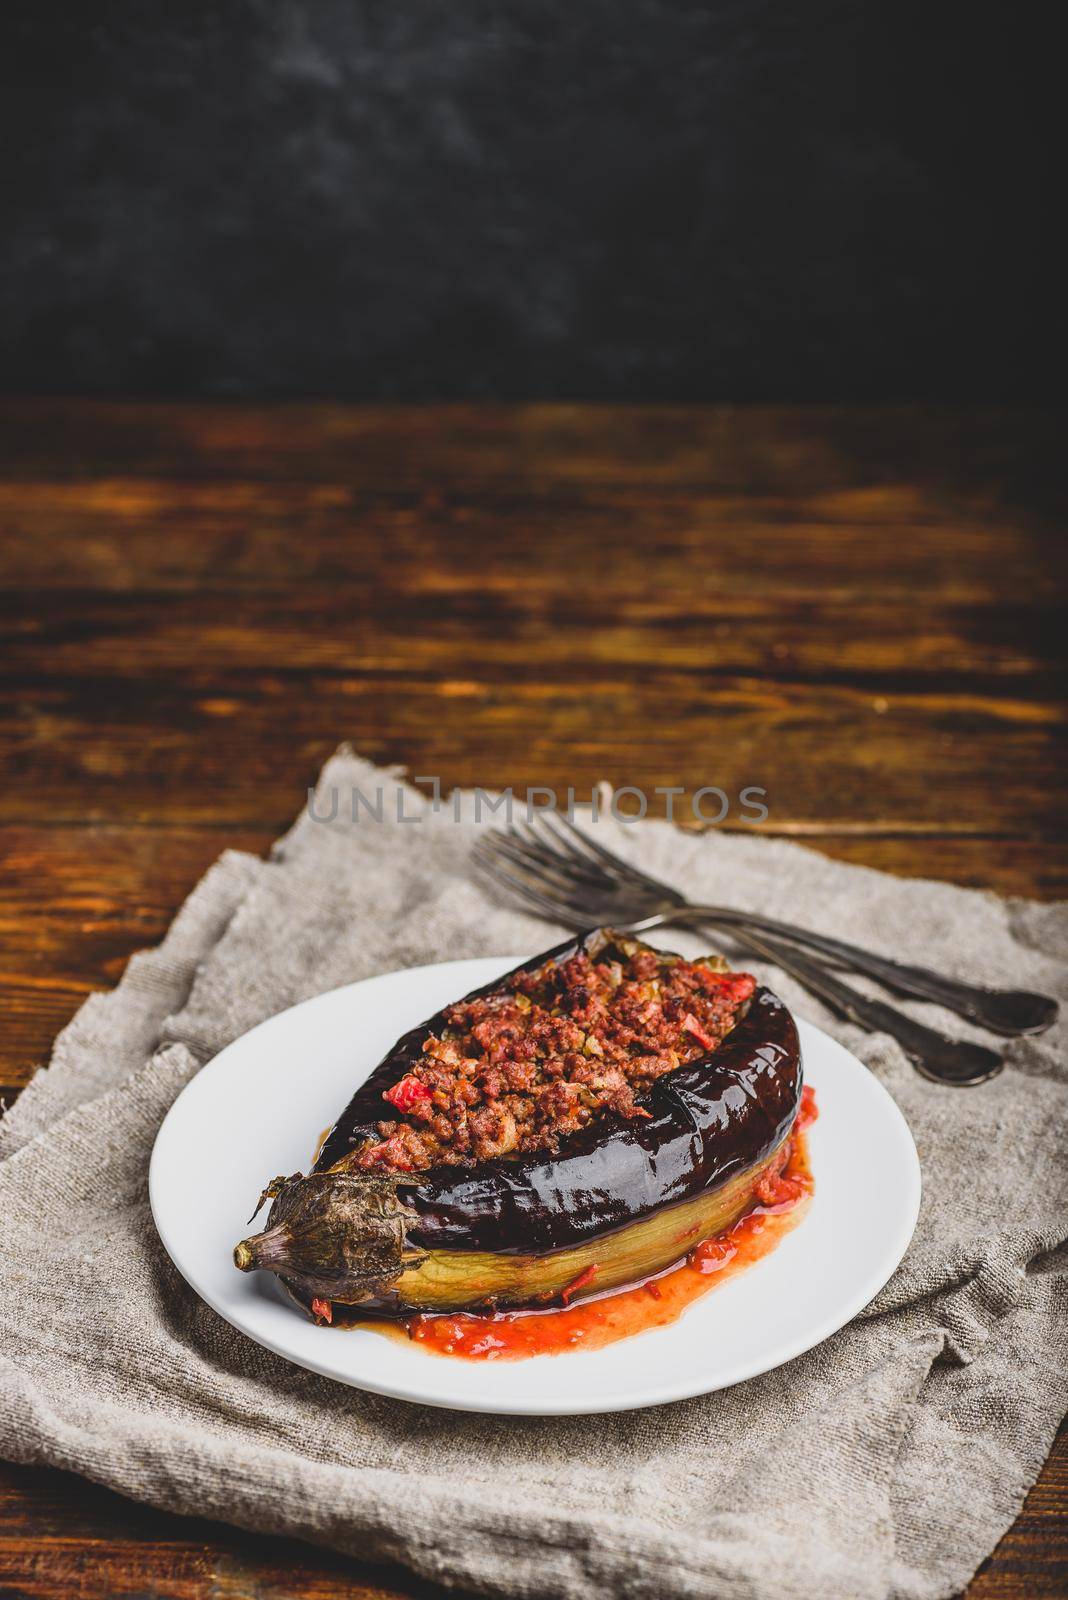 Baked eggplant stuffed with ground beef, tomatoes and spices on white plate. Traditional dish Karniyarik of turkish cuisine